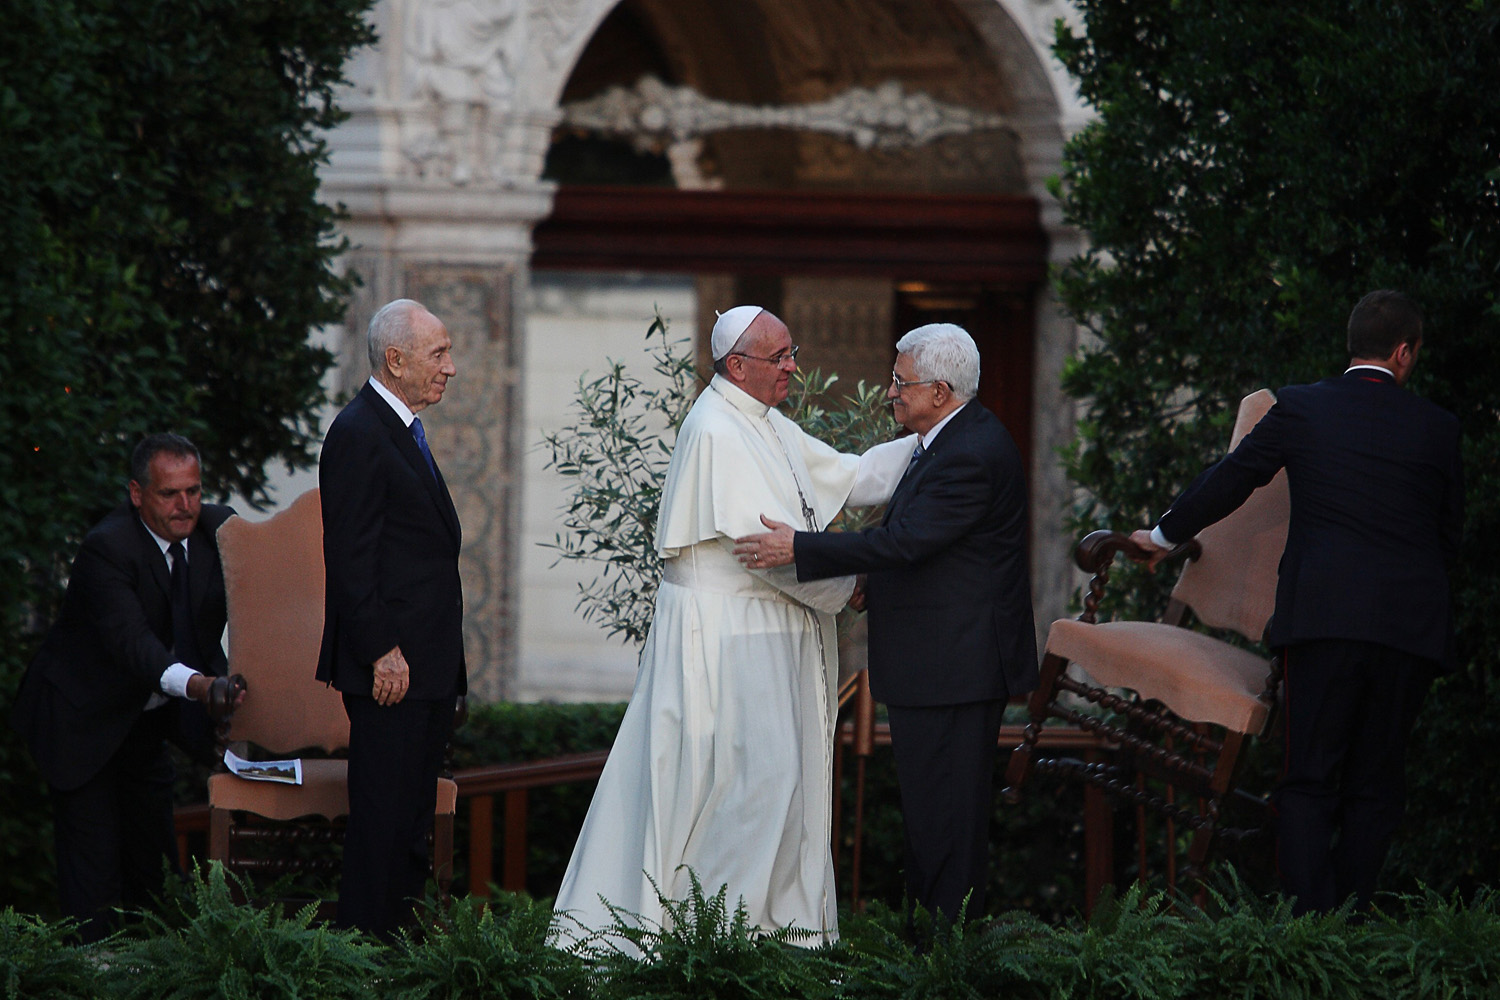 Pope Francis (C) with Palestinian leader Mahmud Abbas (R) and Israeli President Shimon Peres during a joint peace prayer at the Vatican Gardens in Vatican City, Rome on June 8, 2014.